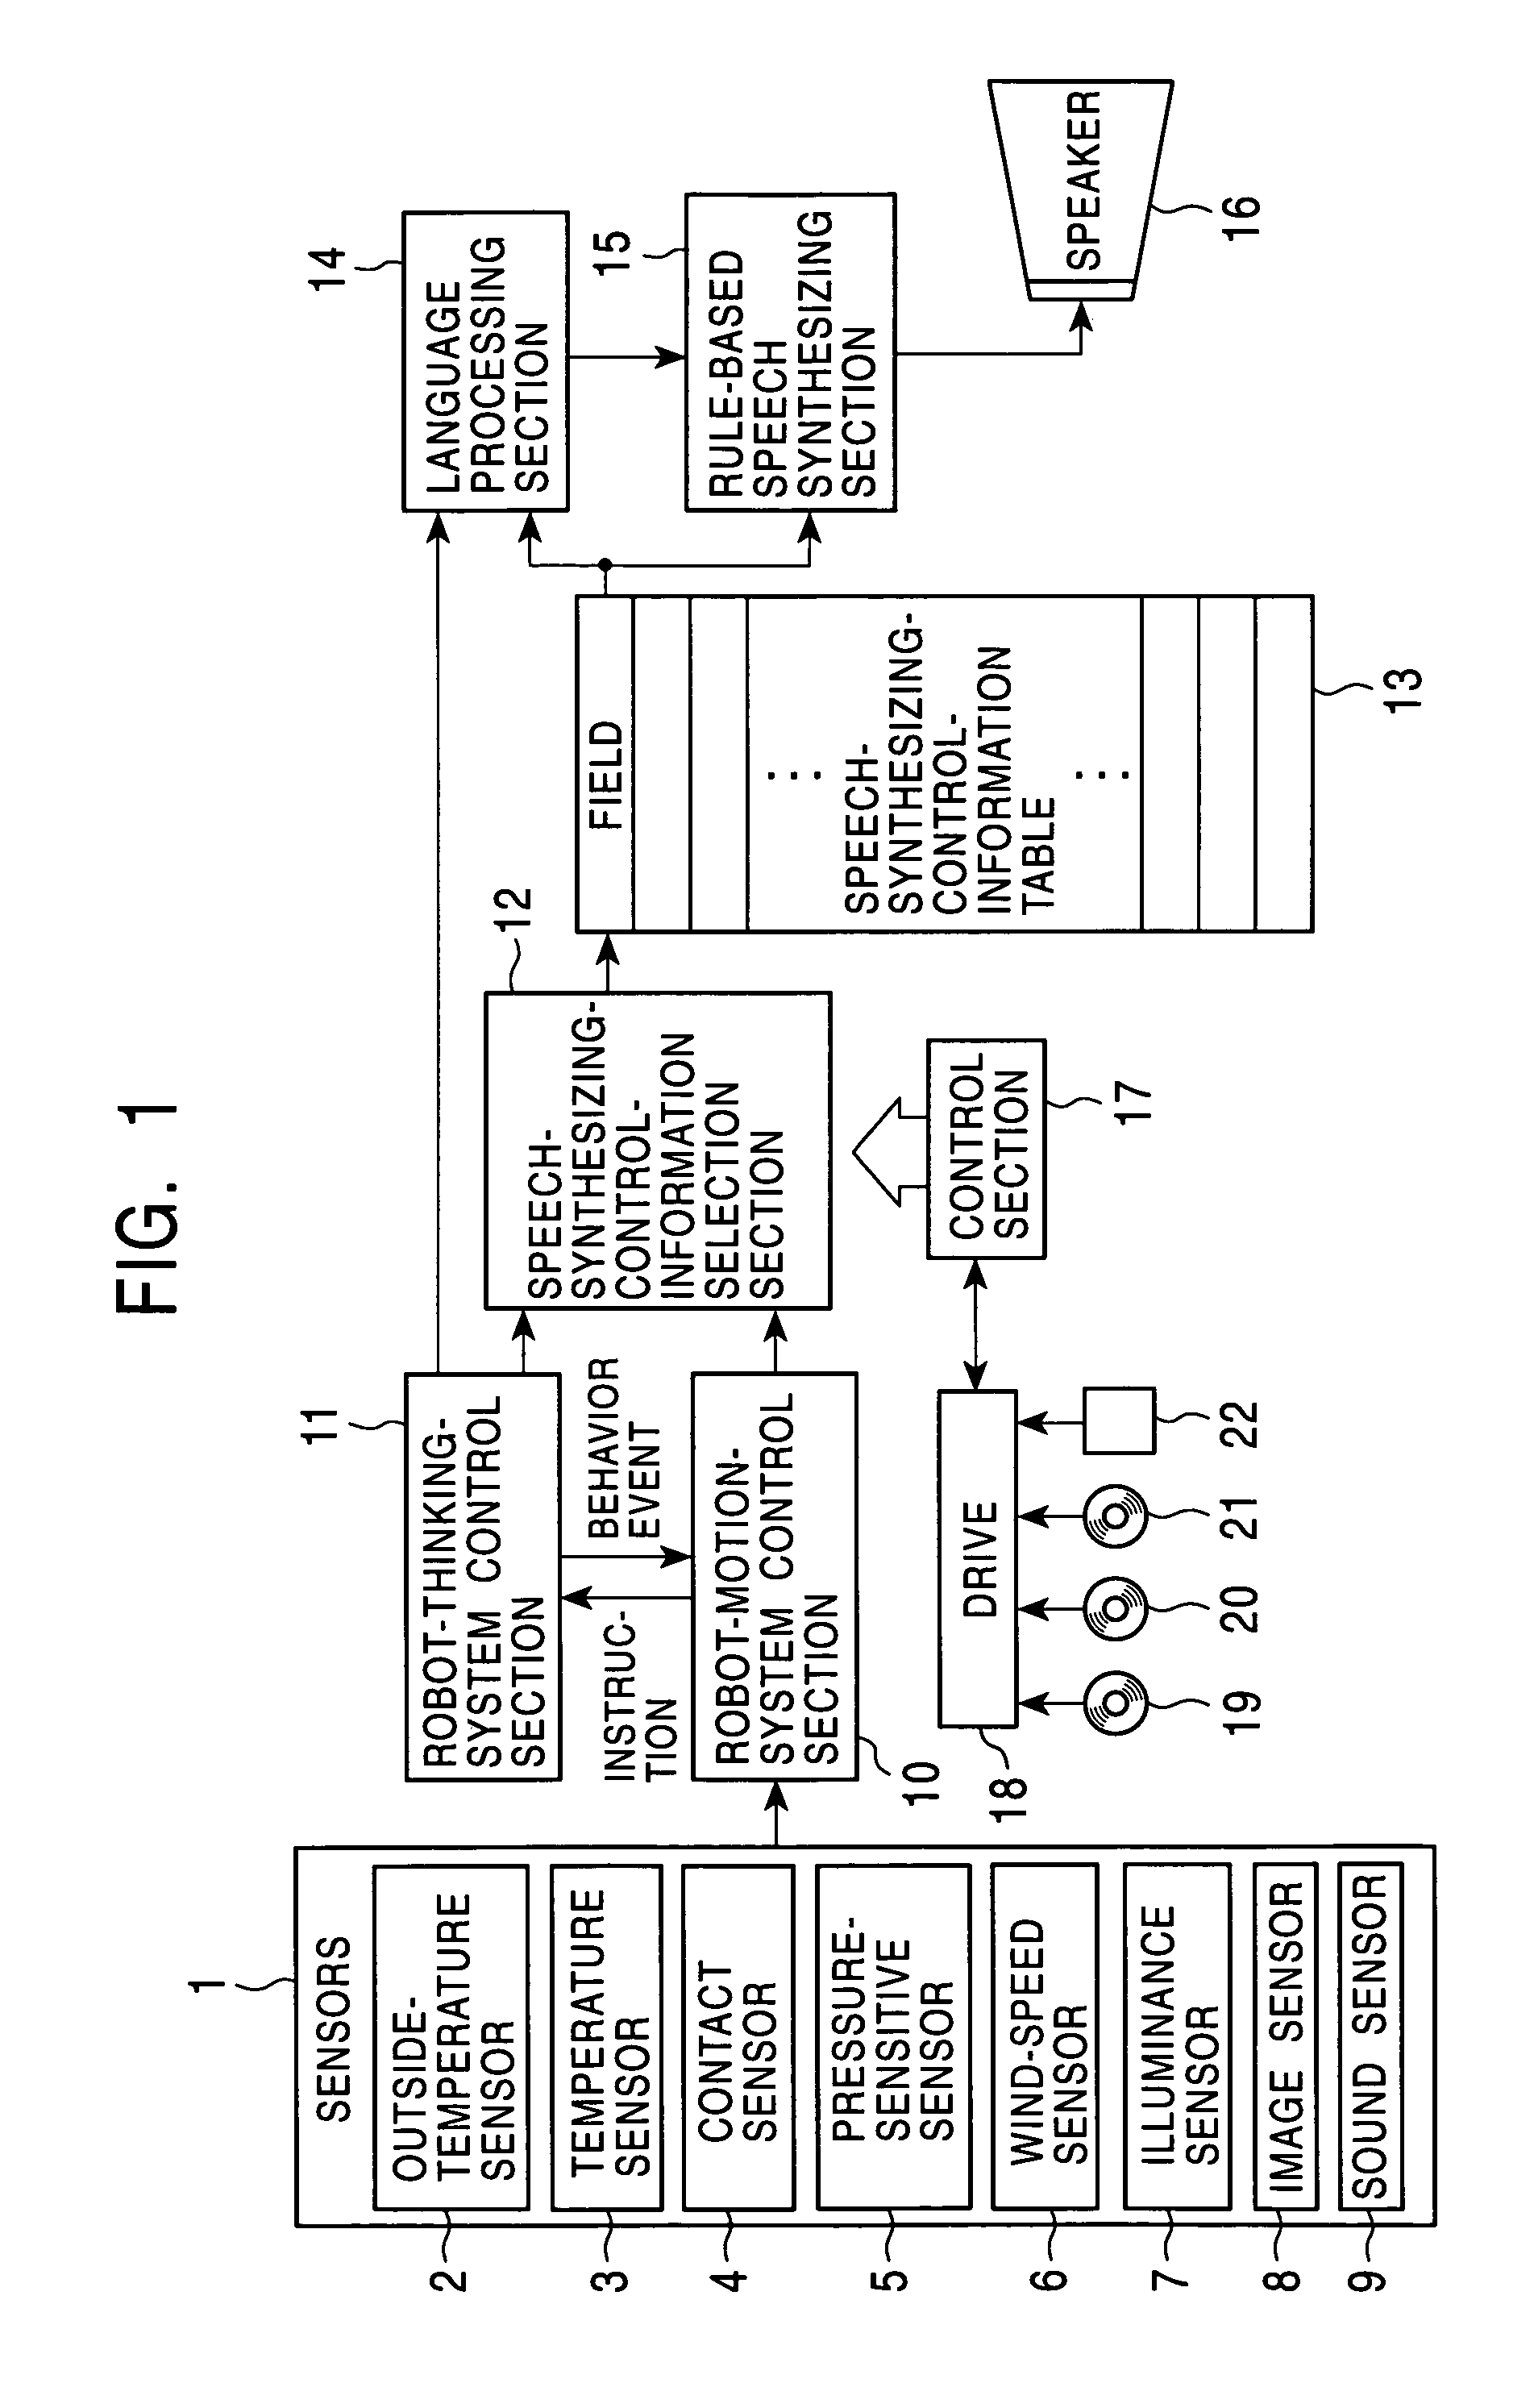 Speech synthesizing apparatus, speech synthesizing method, and recording medium using a plurality of substitute dictionaries corresponding to pre-programmed personality information